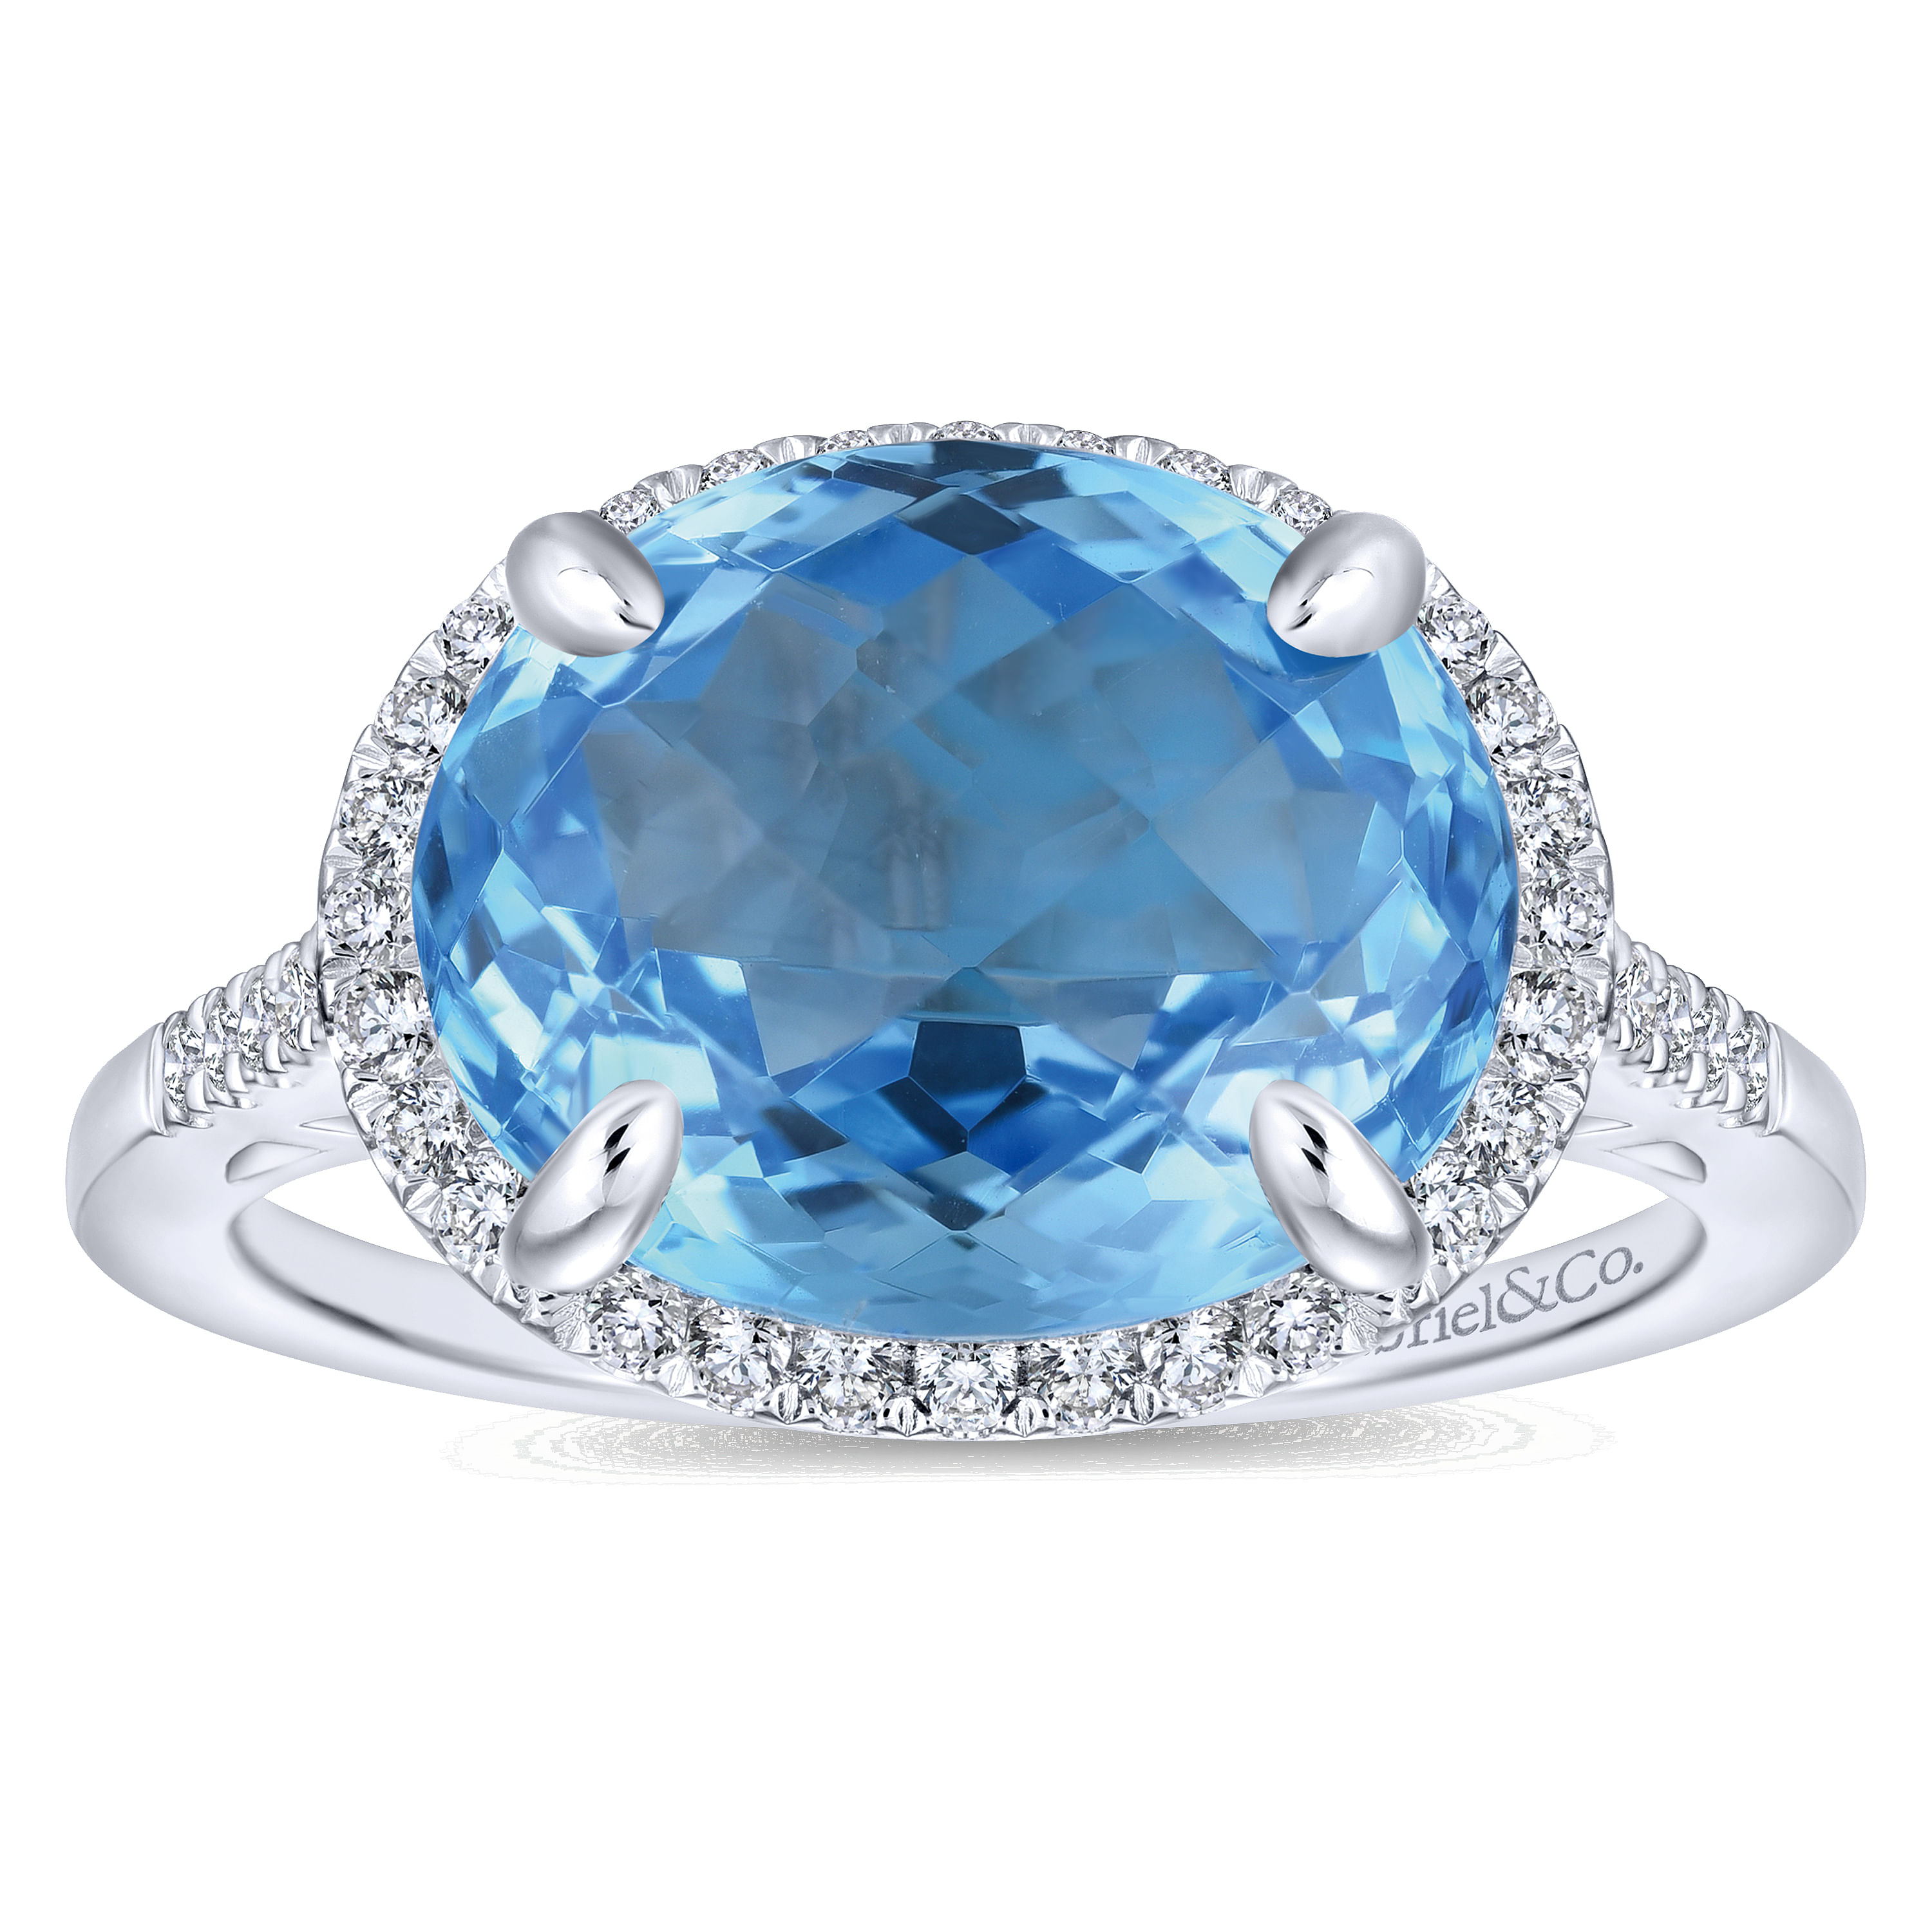 14K White Gold Oval Swiss Blue Topaz and Diamond Halo Ring